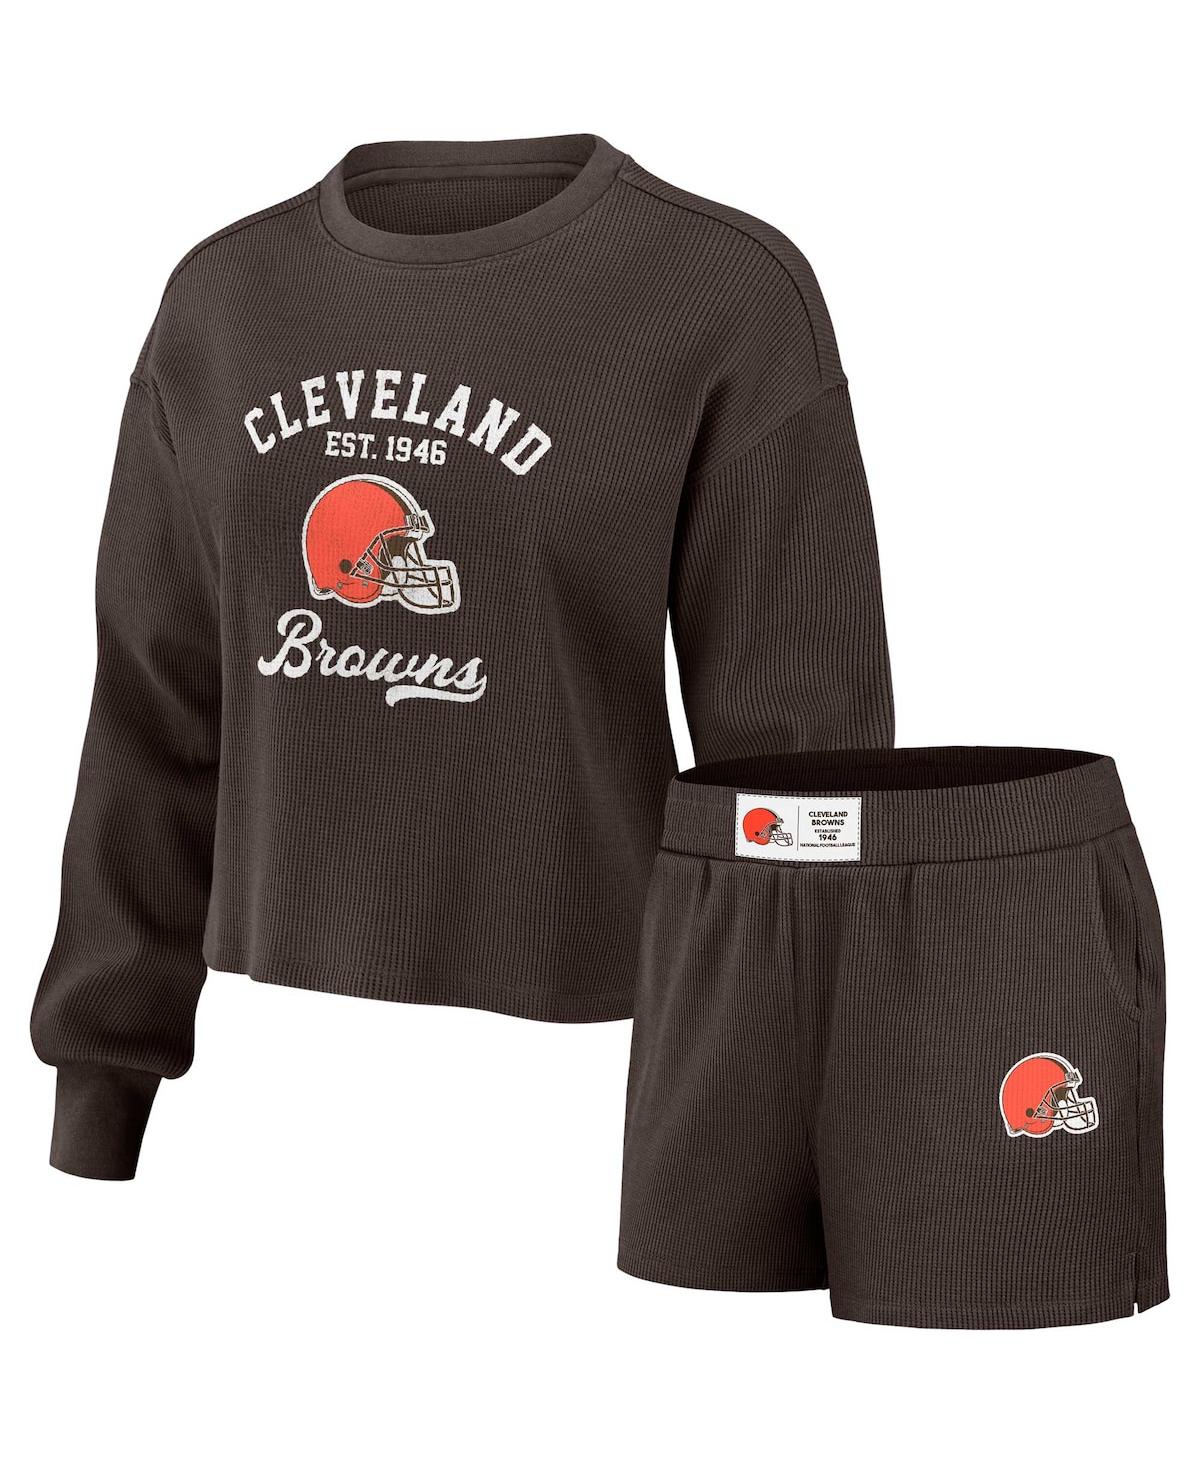 Women's Wear by Erin Andrews Brown Distressed Cleveland Browns Waffle Knit Long Sleeve T-shirt and Shorts Lounge Set - Brown